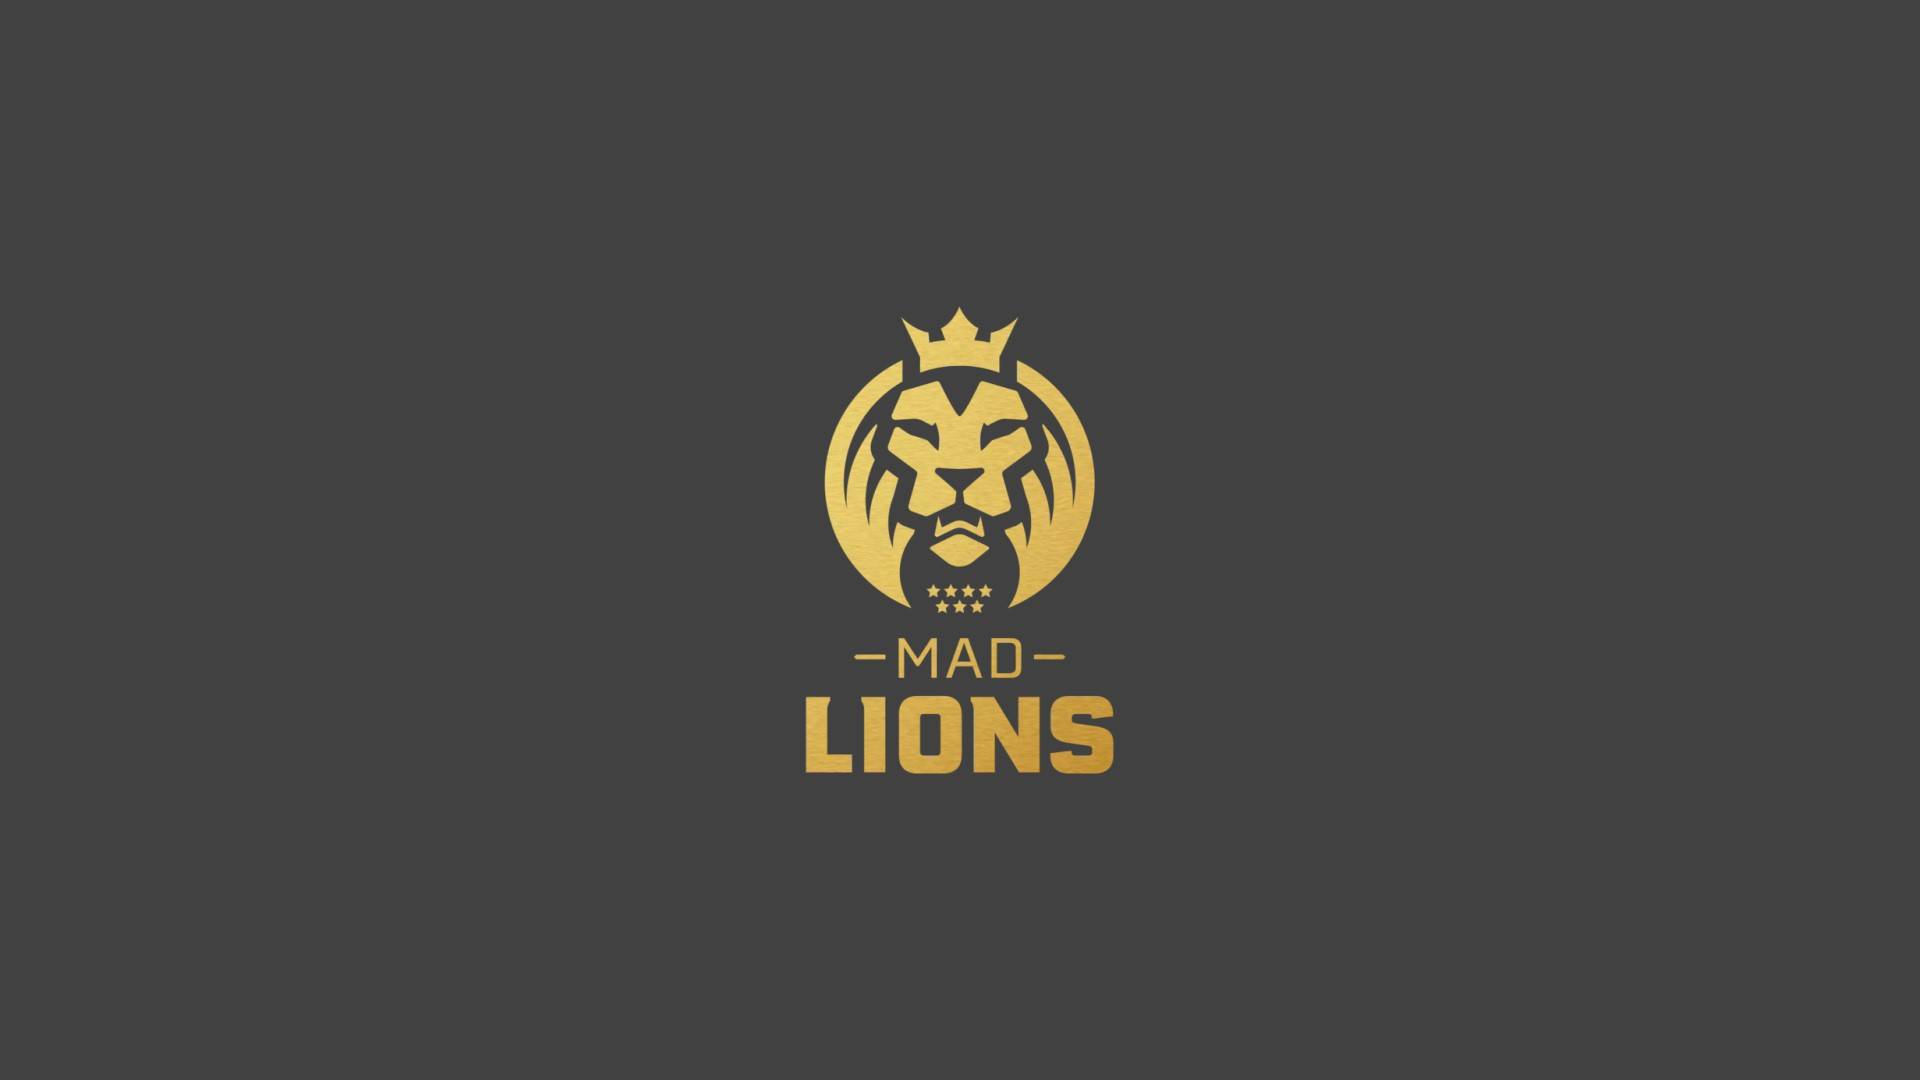 worlds 2021 mad lions